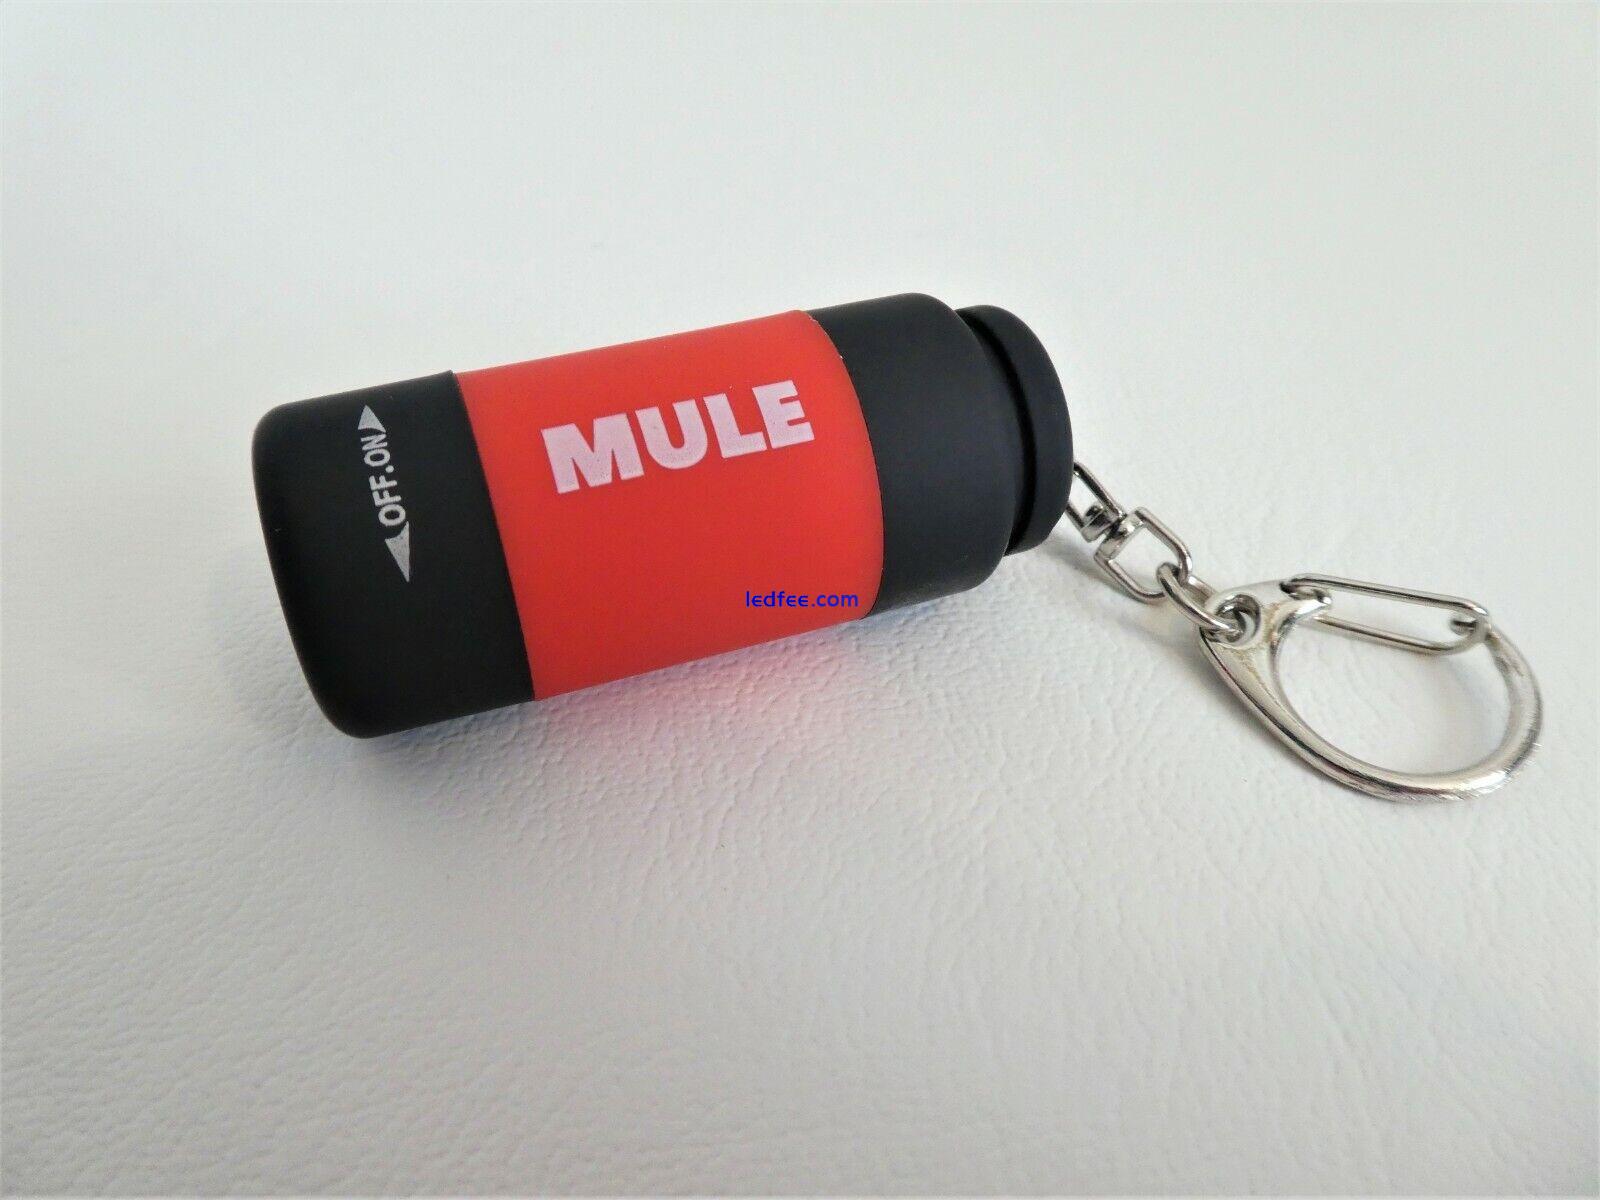 MULE RED USB Rechargeable water resistant inspection torch key-ring EDC 2 